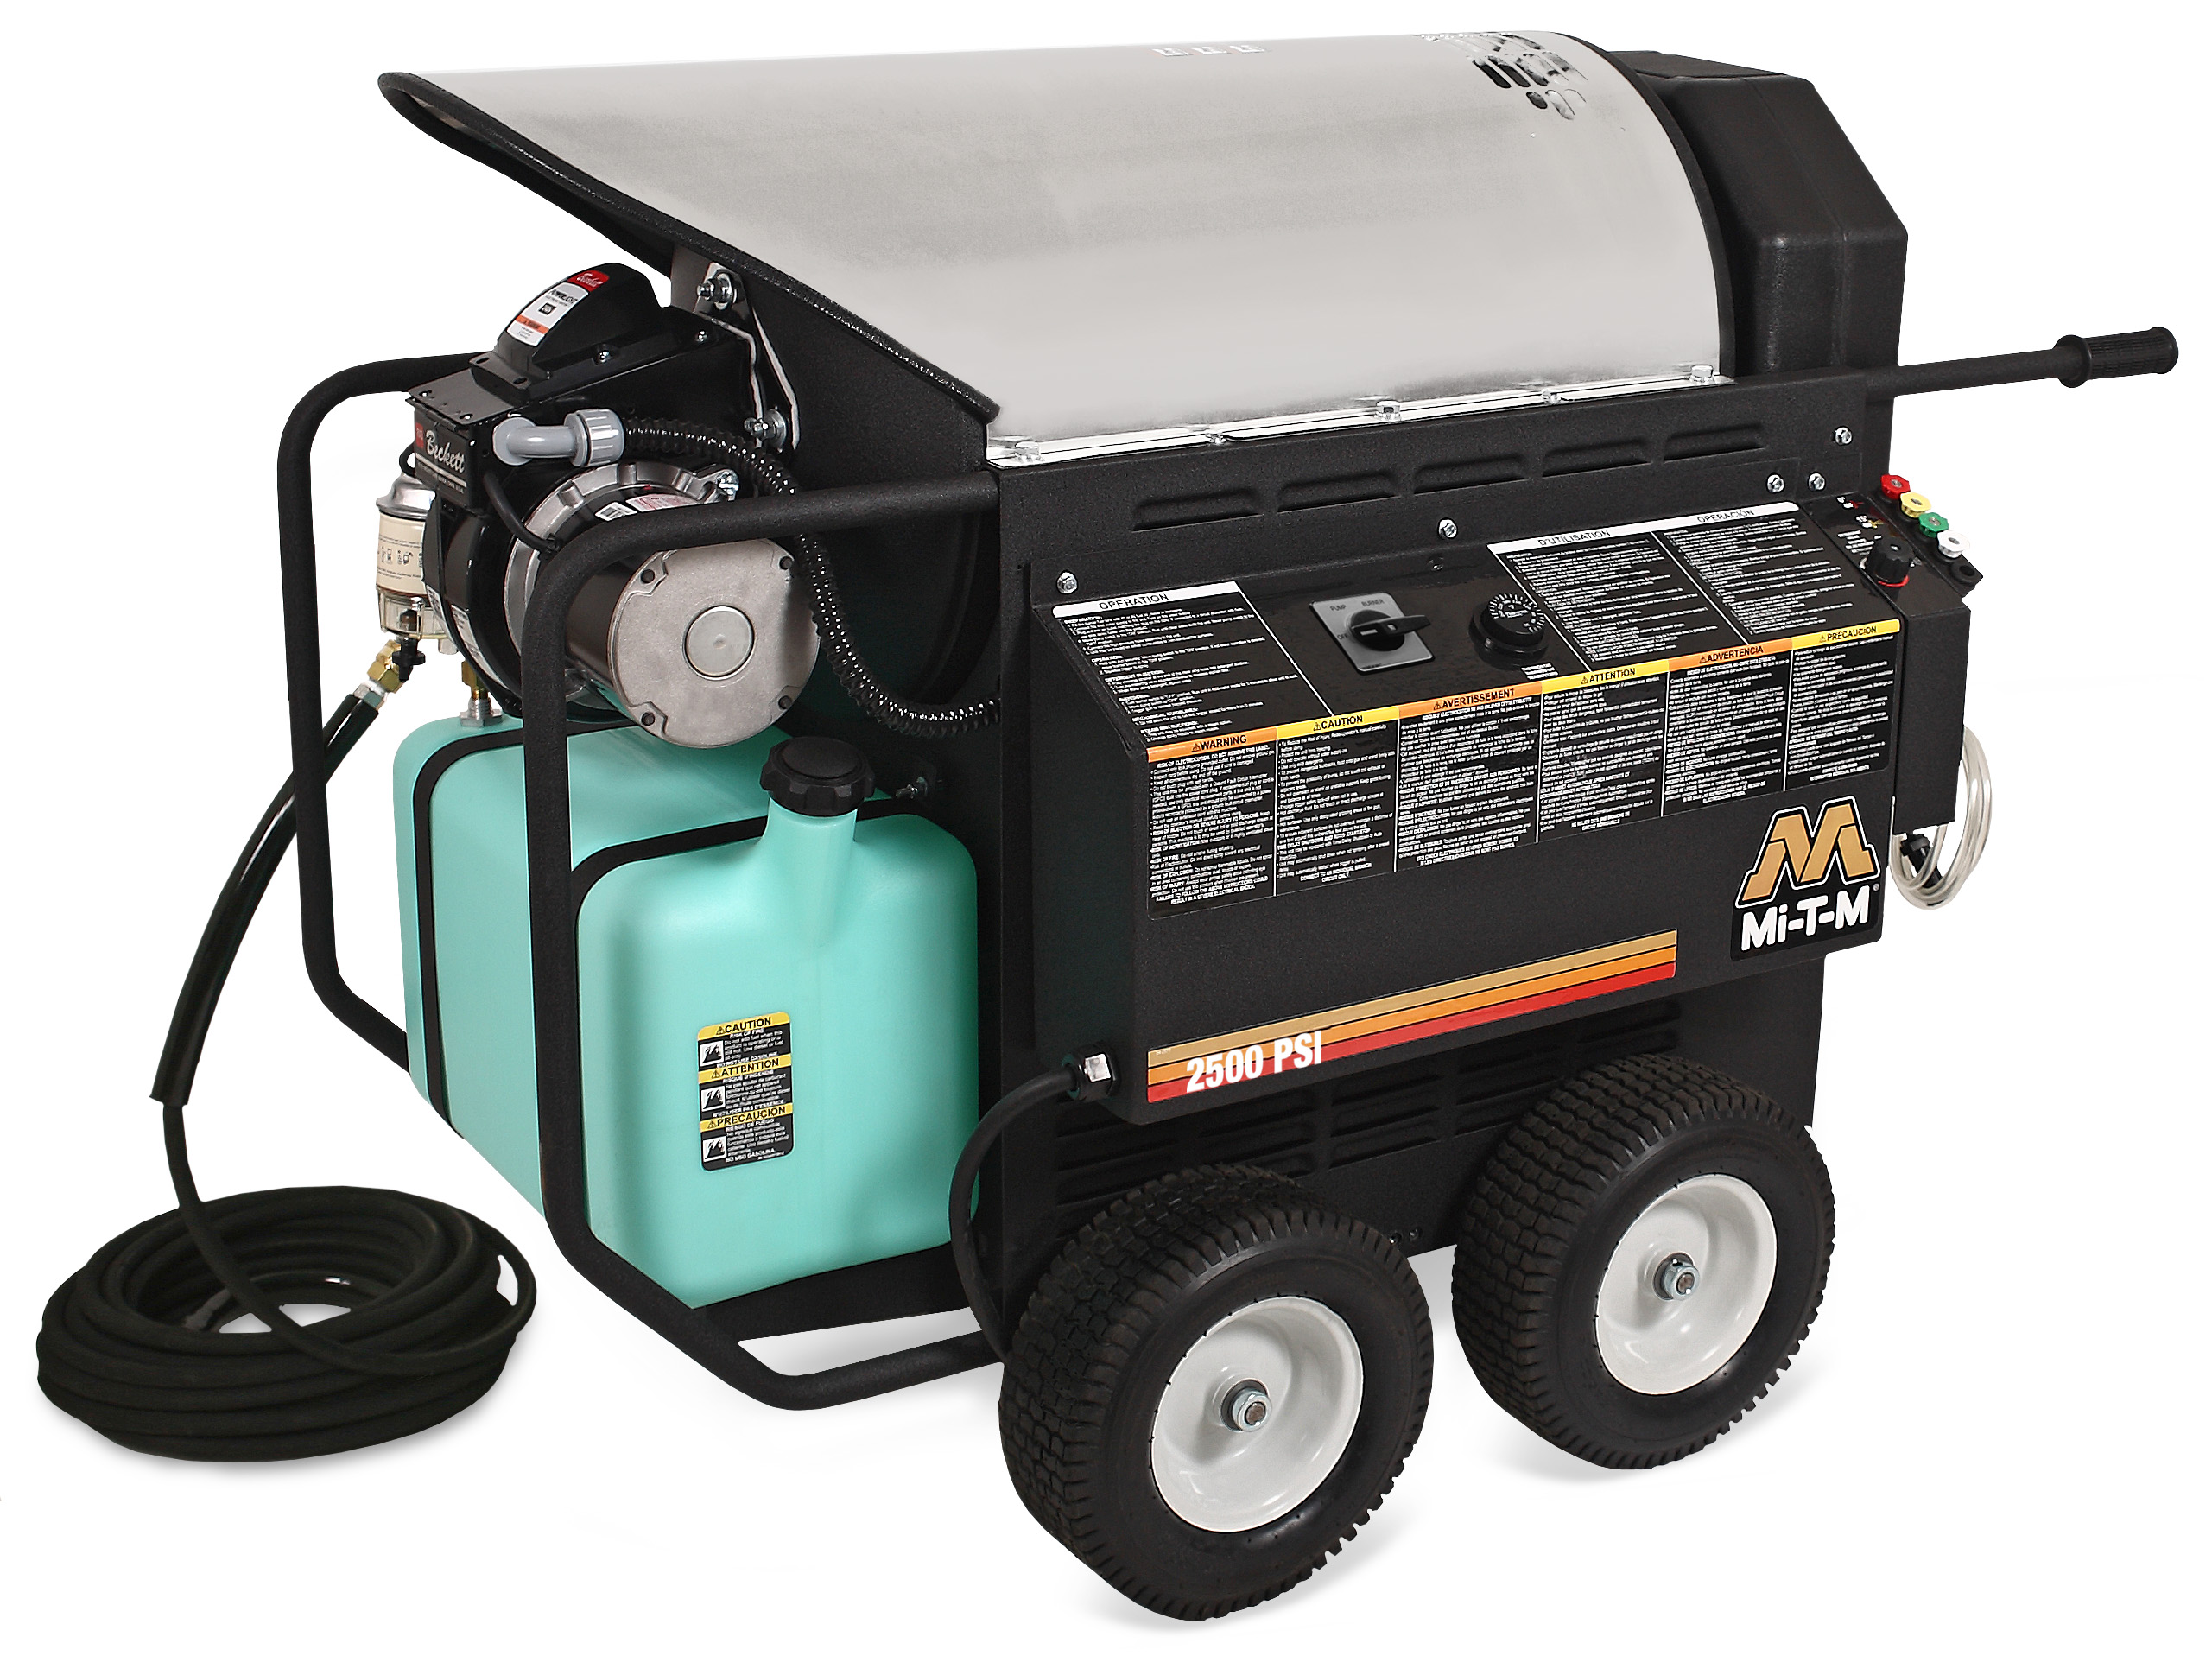 MiTM HHB25030E2A Portable Electric Hot Water Pressure Washer Ben